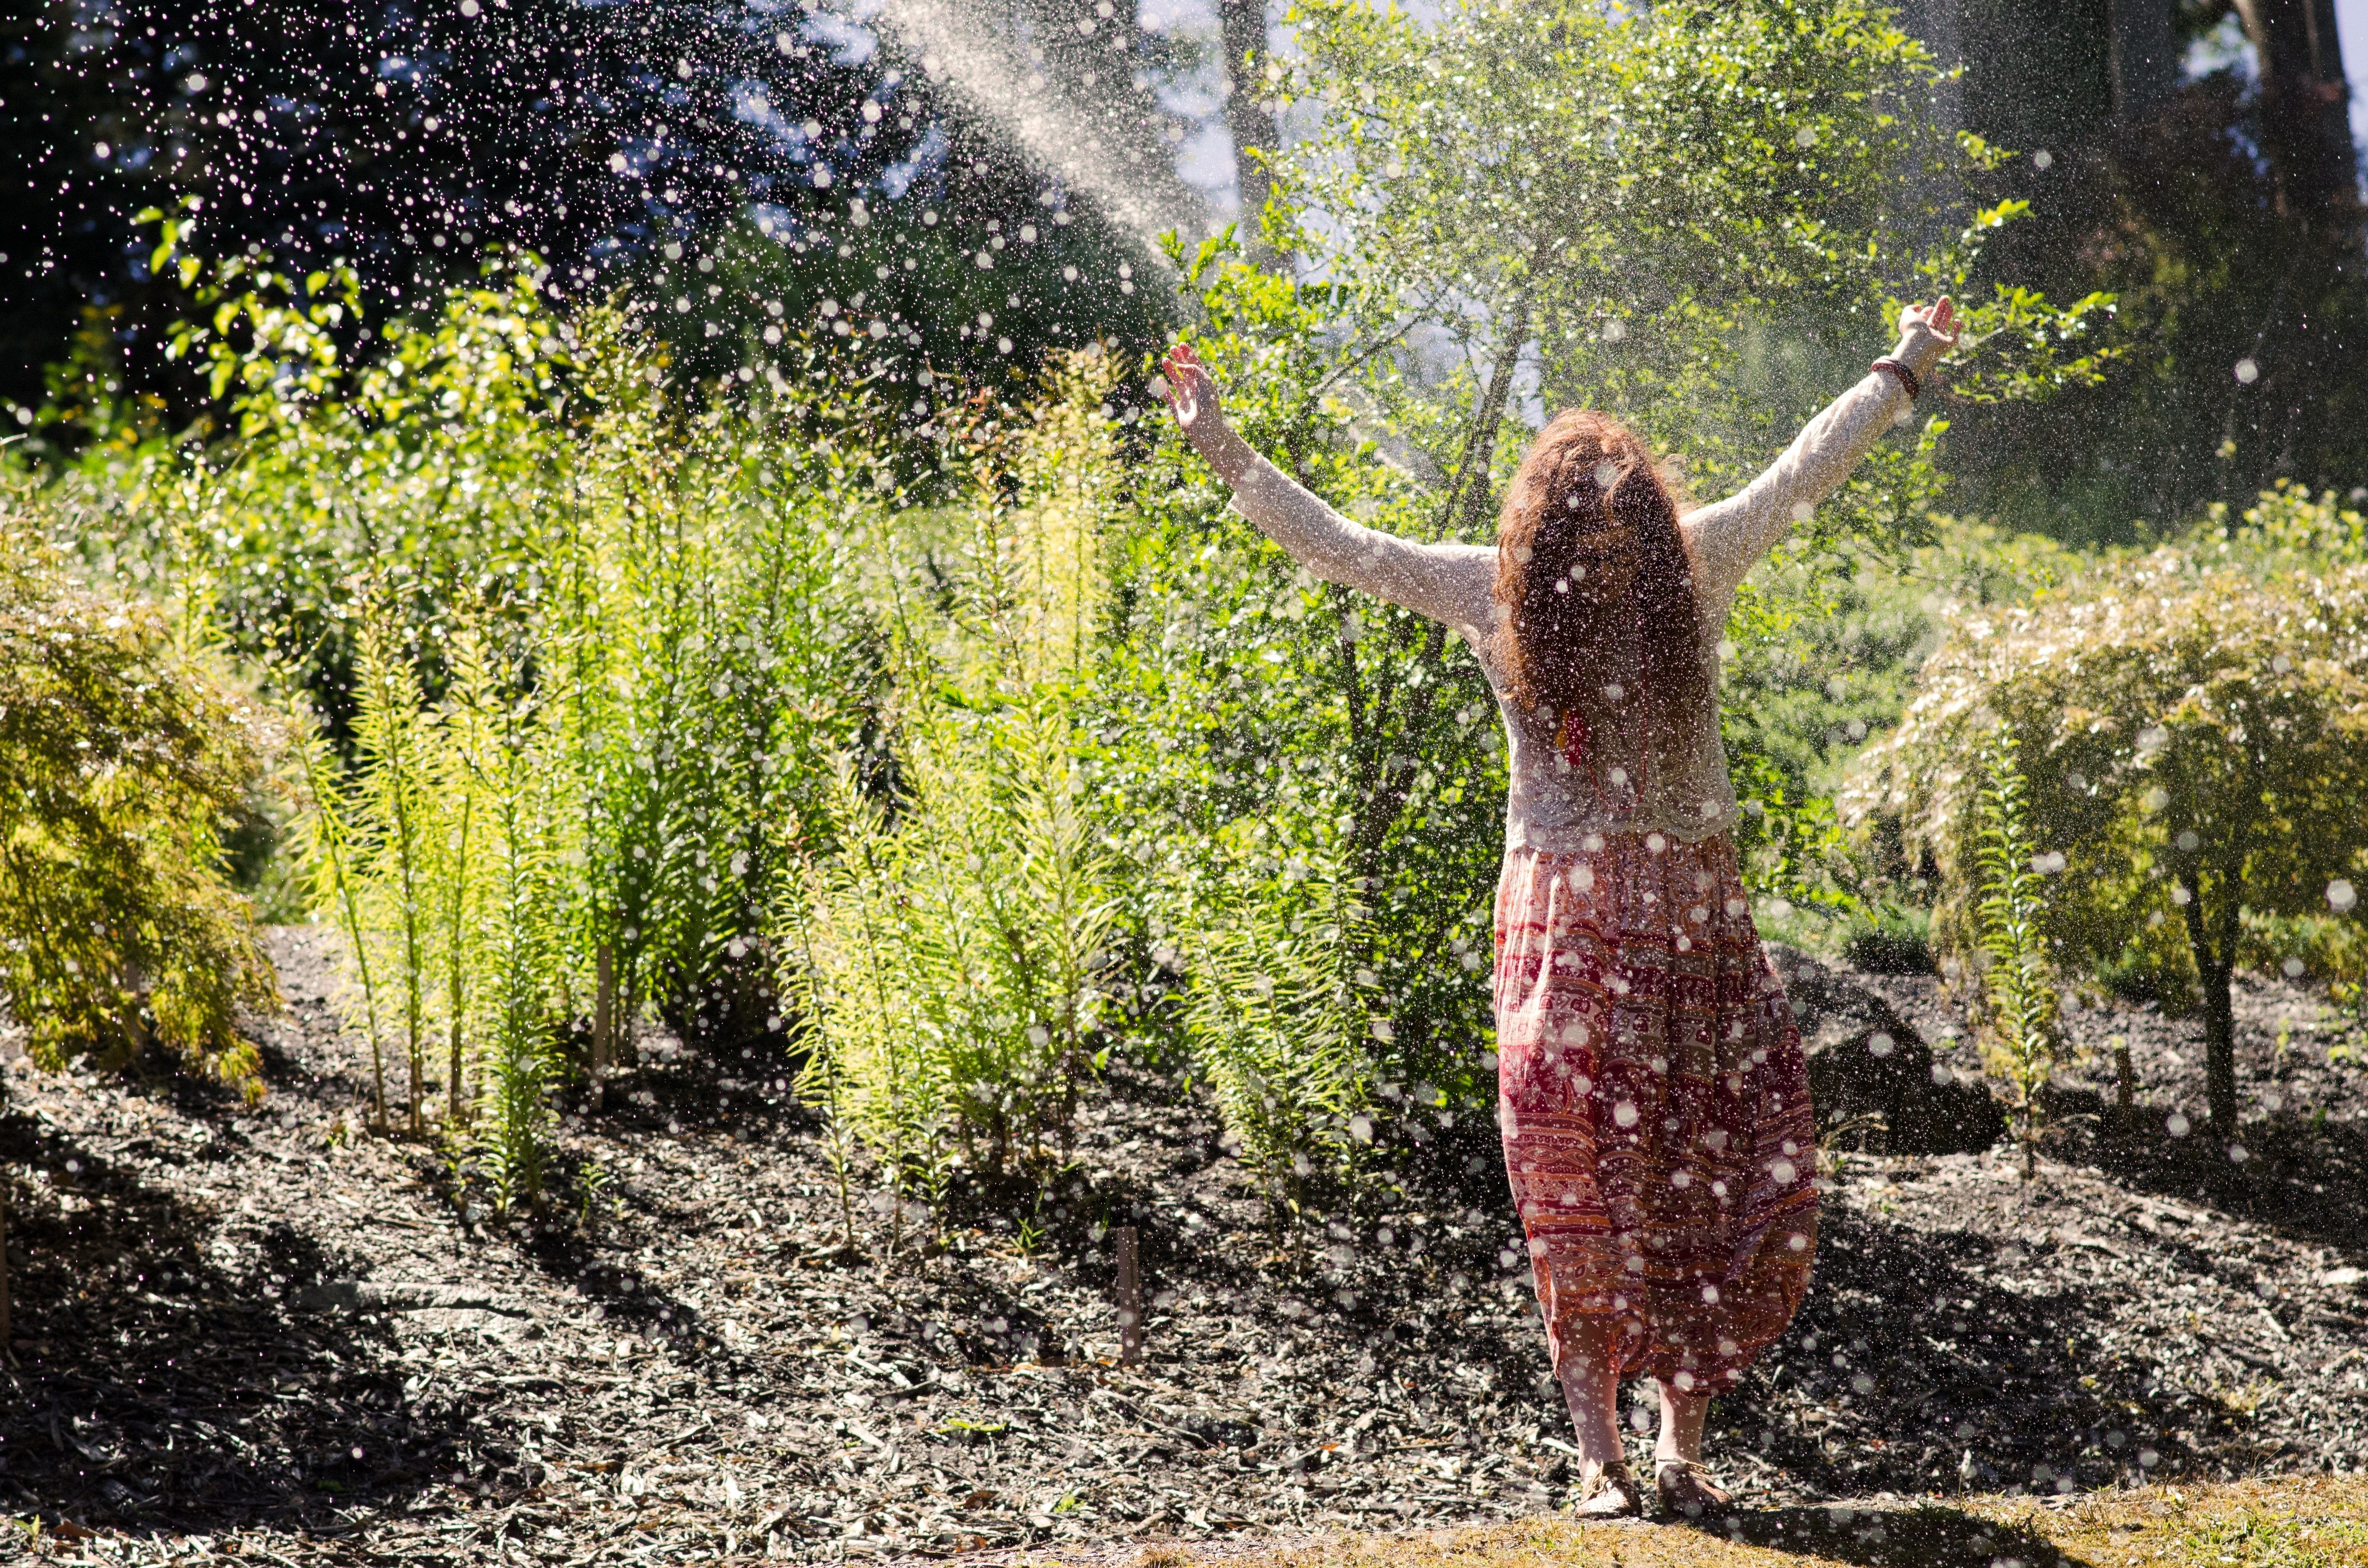 a woman in front of plants playing in a water spraying in the air